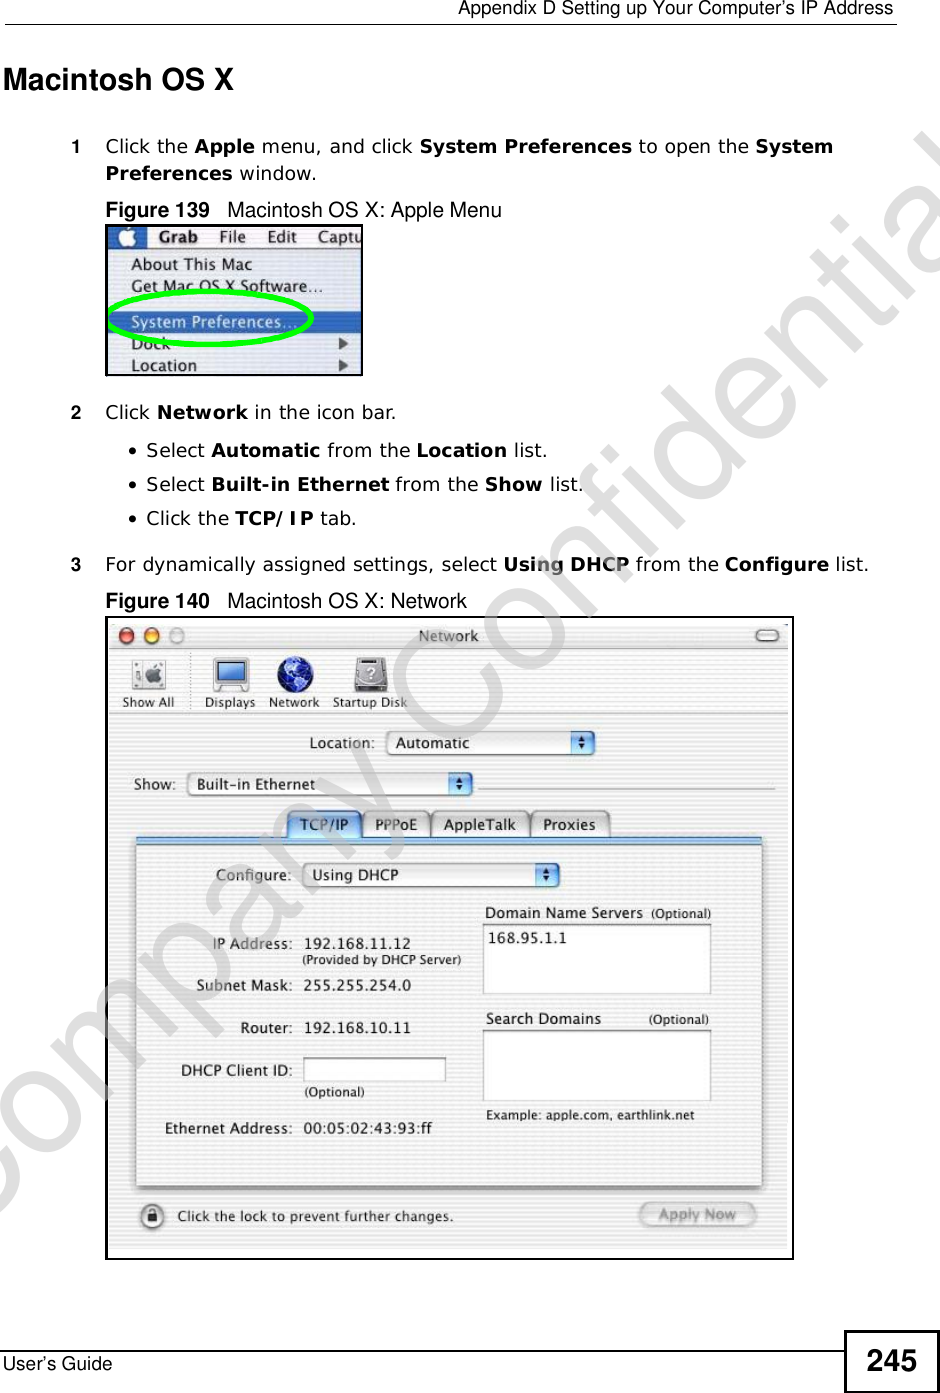  Appendix DSetting up Your Computer’s IP AddressUser’s Guide 245Macintosh OS X1Click the Apple menu, and click System Preferences to open the SystemPreferences window.Figure 139   Macintosh OS X: Apple Menu2Click Network in the icon bar.   •Select Automatic from the Location list.•Select Built-in Ethernet from the Show list. •Click the TCP/IP tab.3For dynamically assigned settings, select Using DHCP from the Configure list.Figure 140   Macintosh OS X: NetworkCompany Confidential